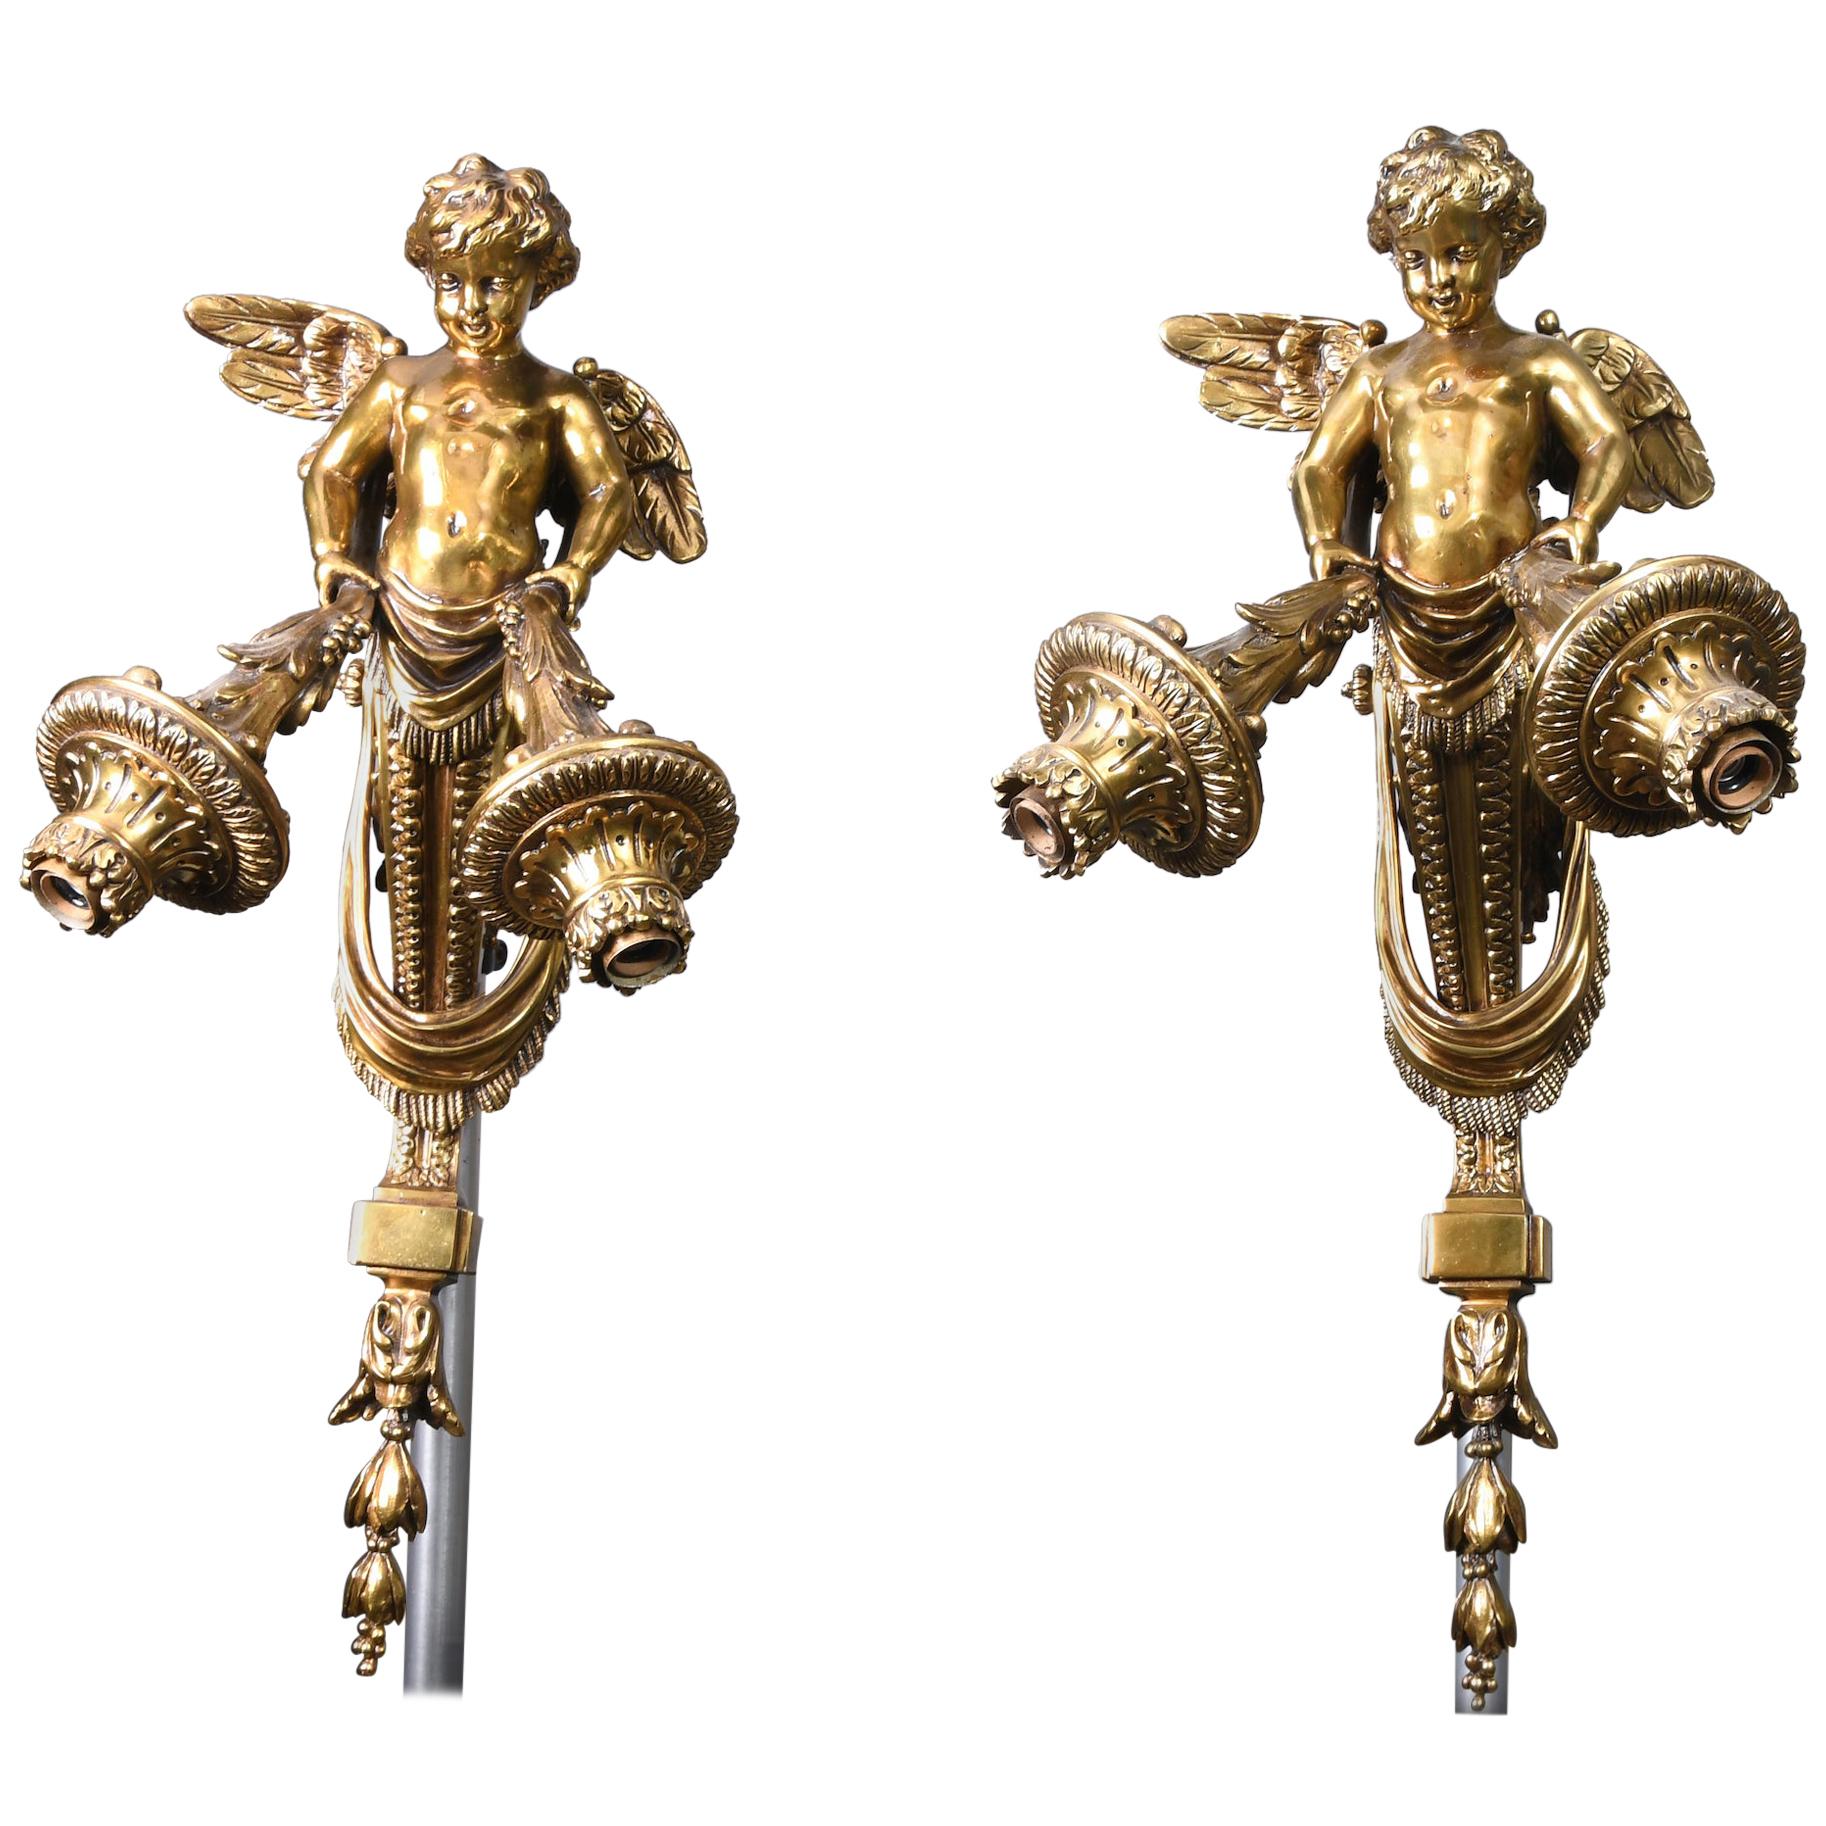 Early 19th Century Pair of Bronze Empire Revival Cherub Wall Sconces/Torcherier